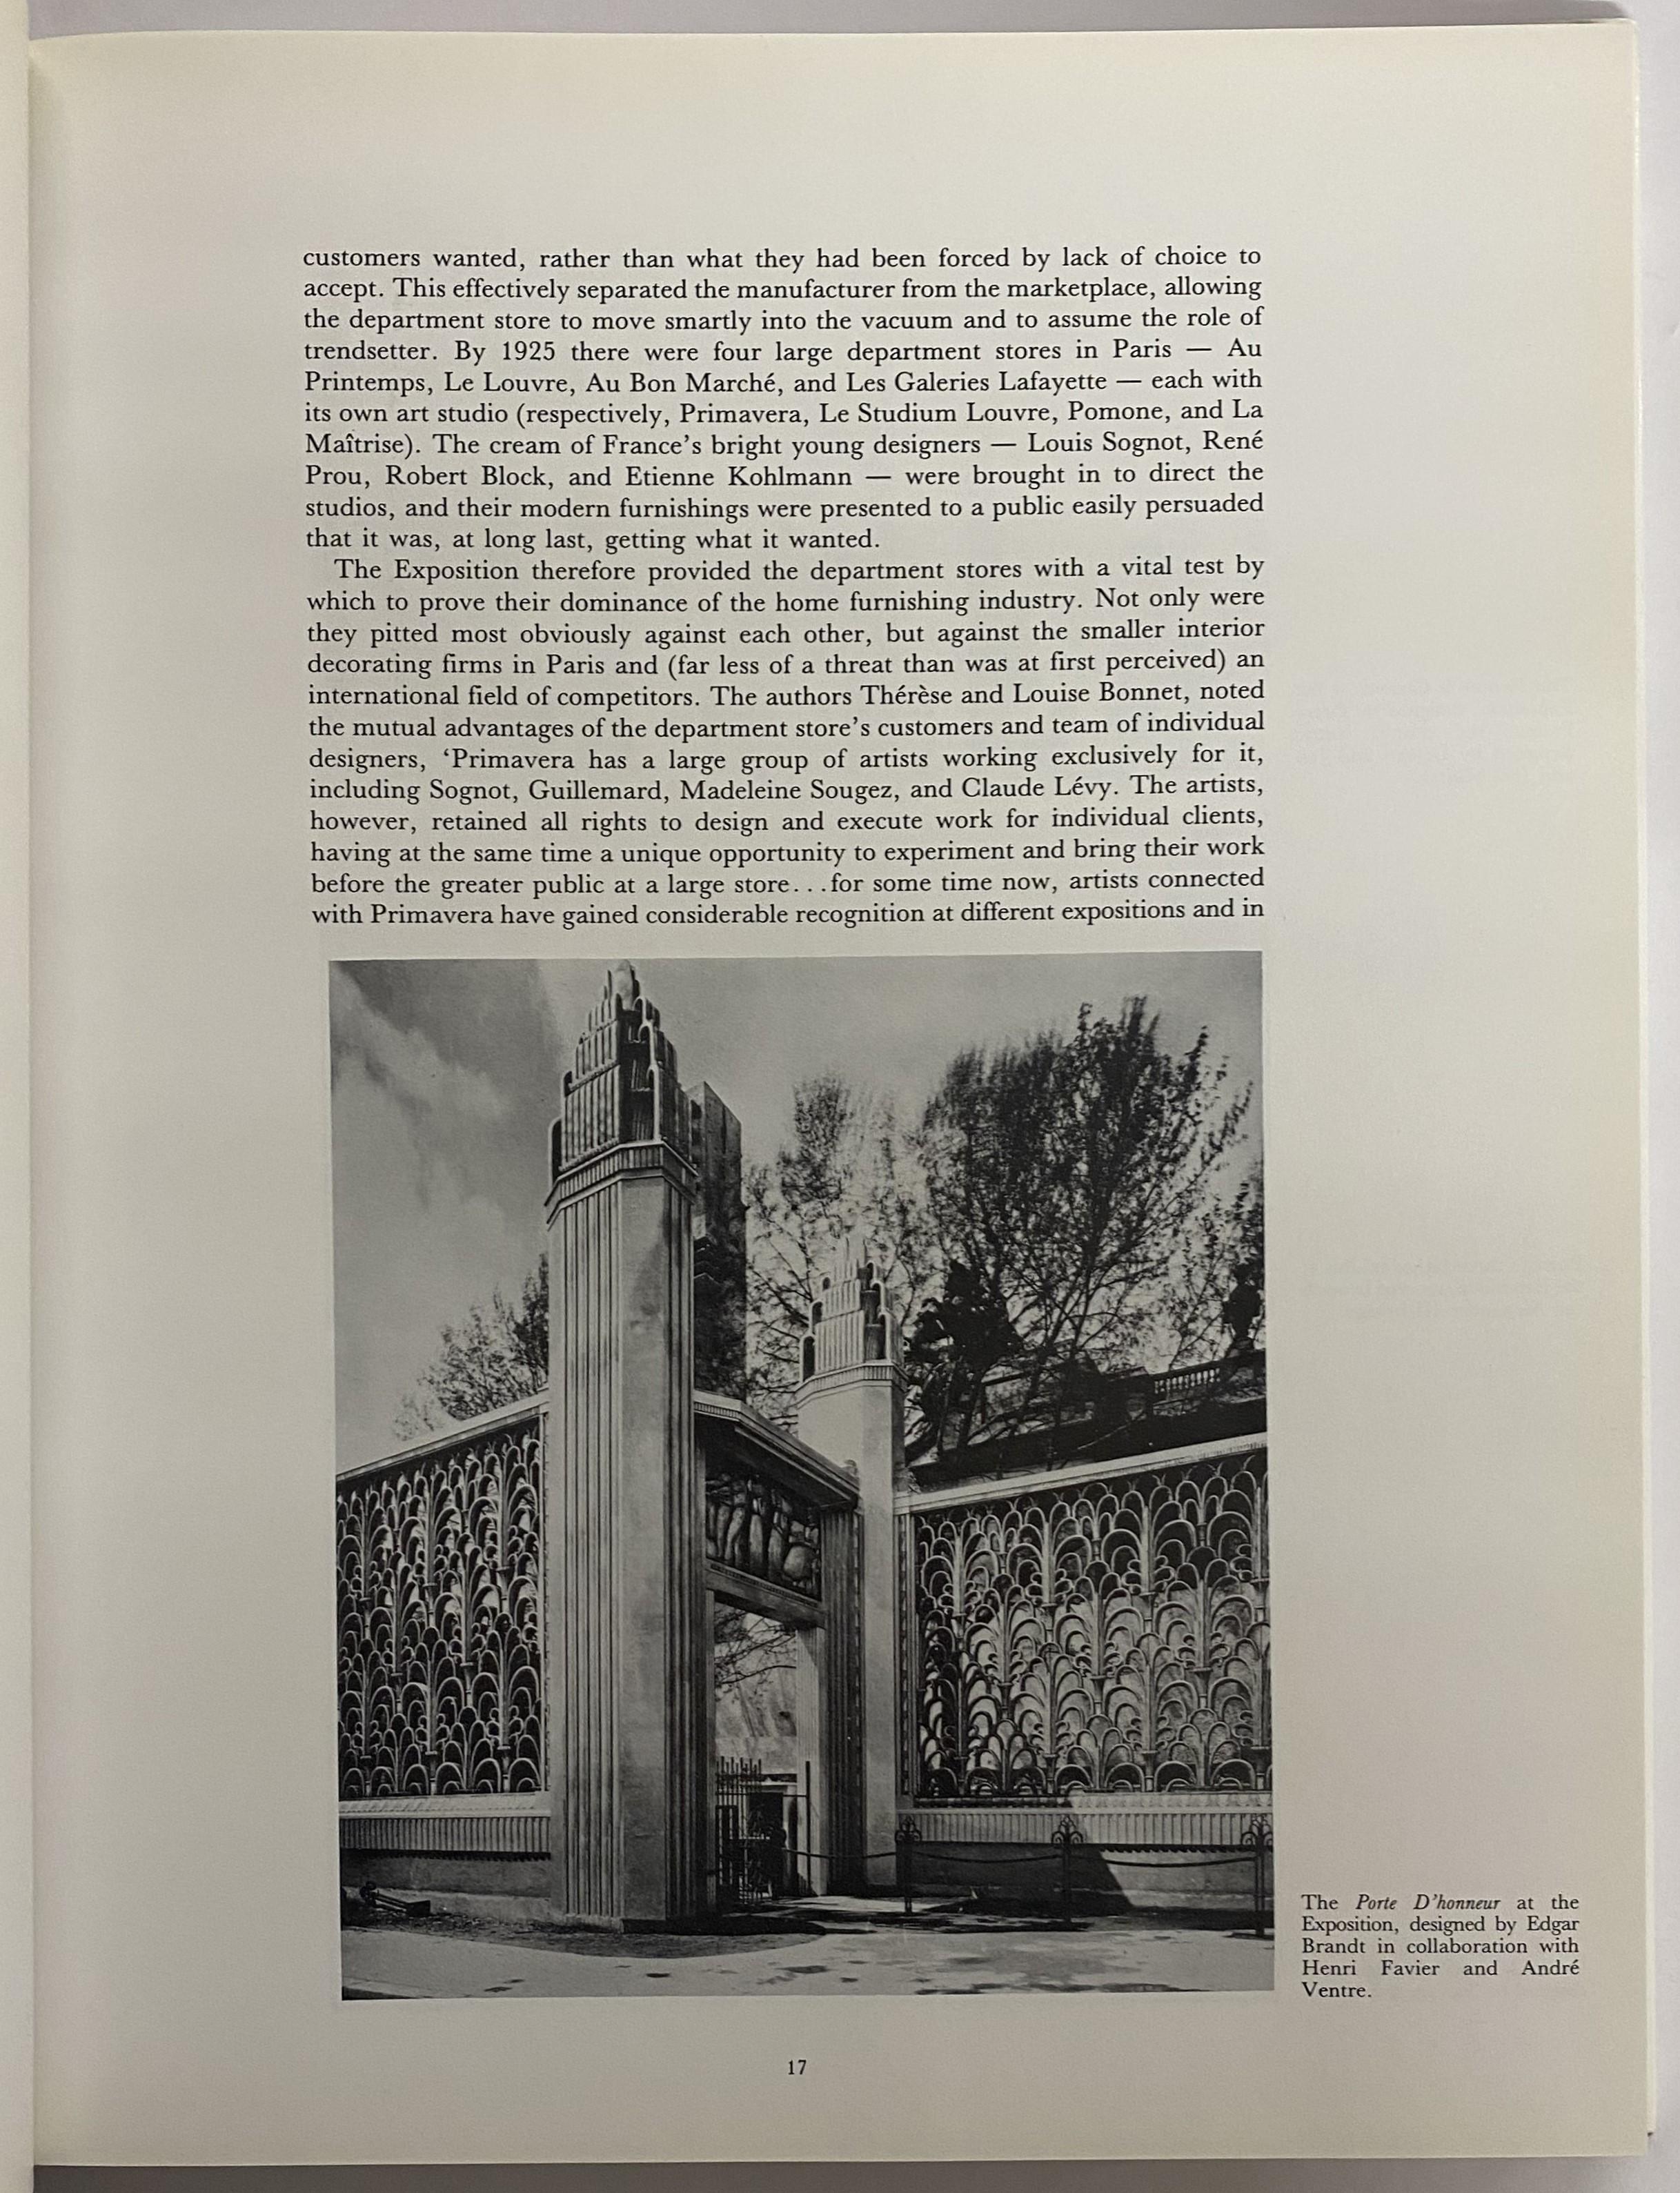 by Maurice Dufrene
The dramatic 1925 Paris Expositions des Arts Decoratifs heralded the emergence of the Art Deco movement as a great decorative style. The High Quality photographs in this book were first published in 1926 in three volumes to show